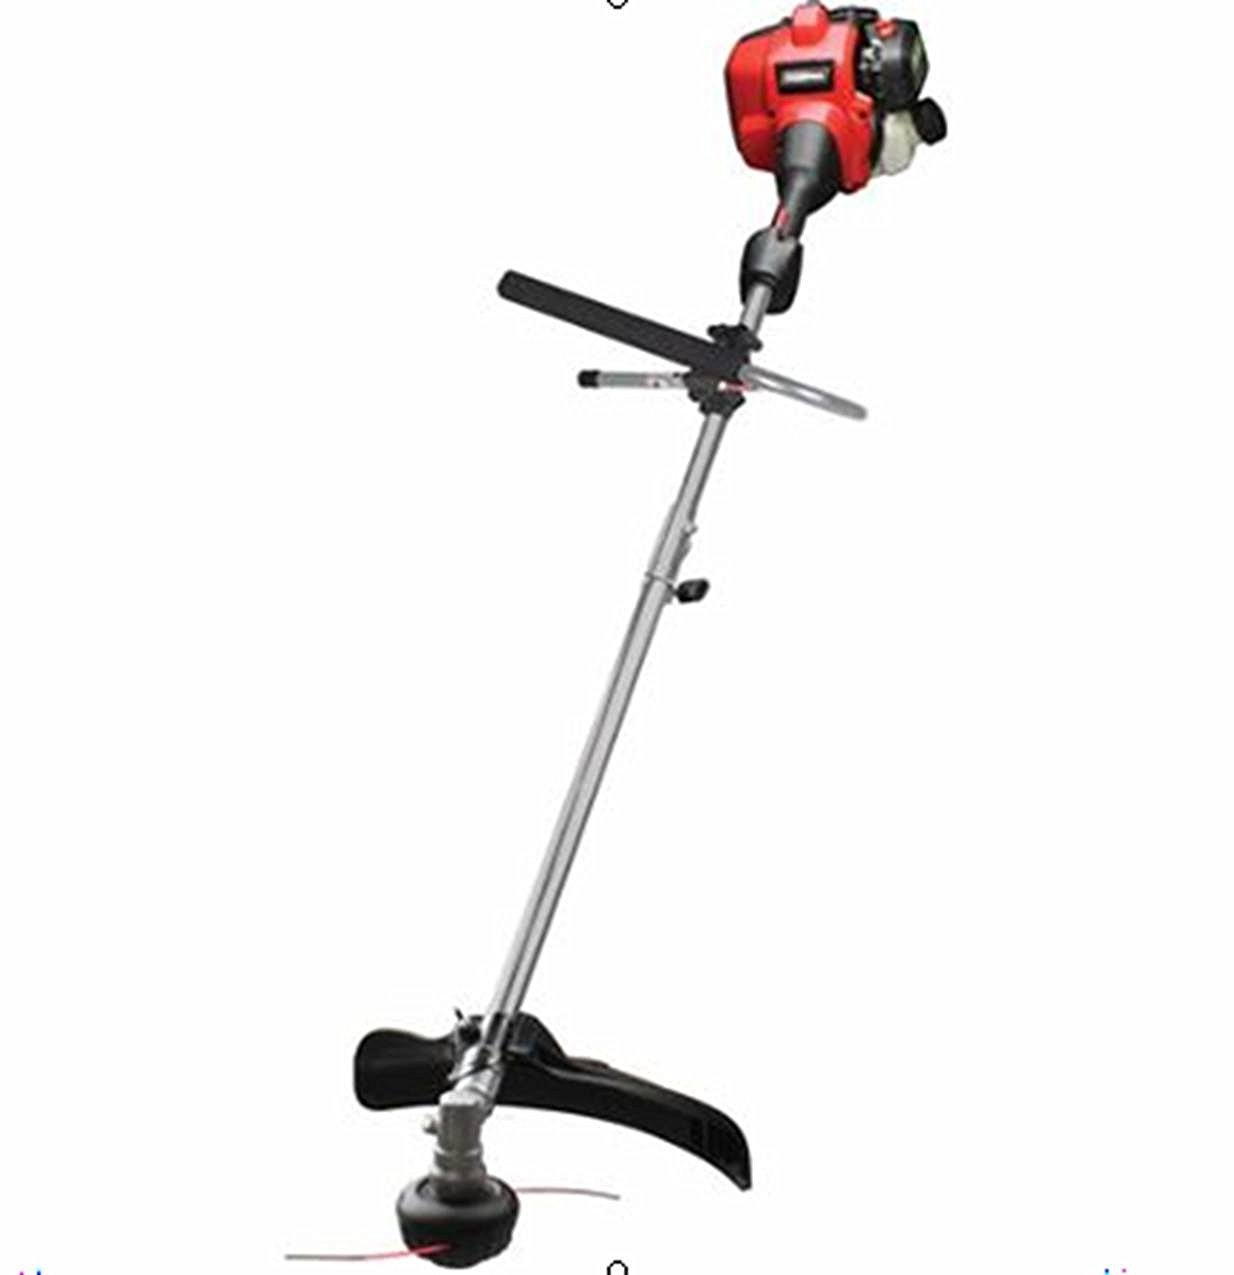 Snapper Red Gas Trimmer/Brush Cutter Straight Shaft